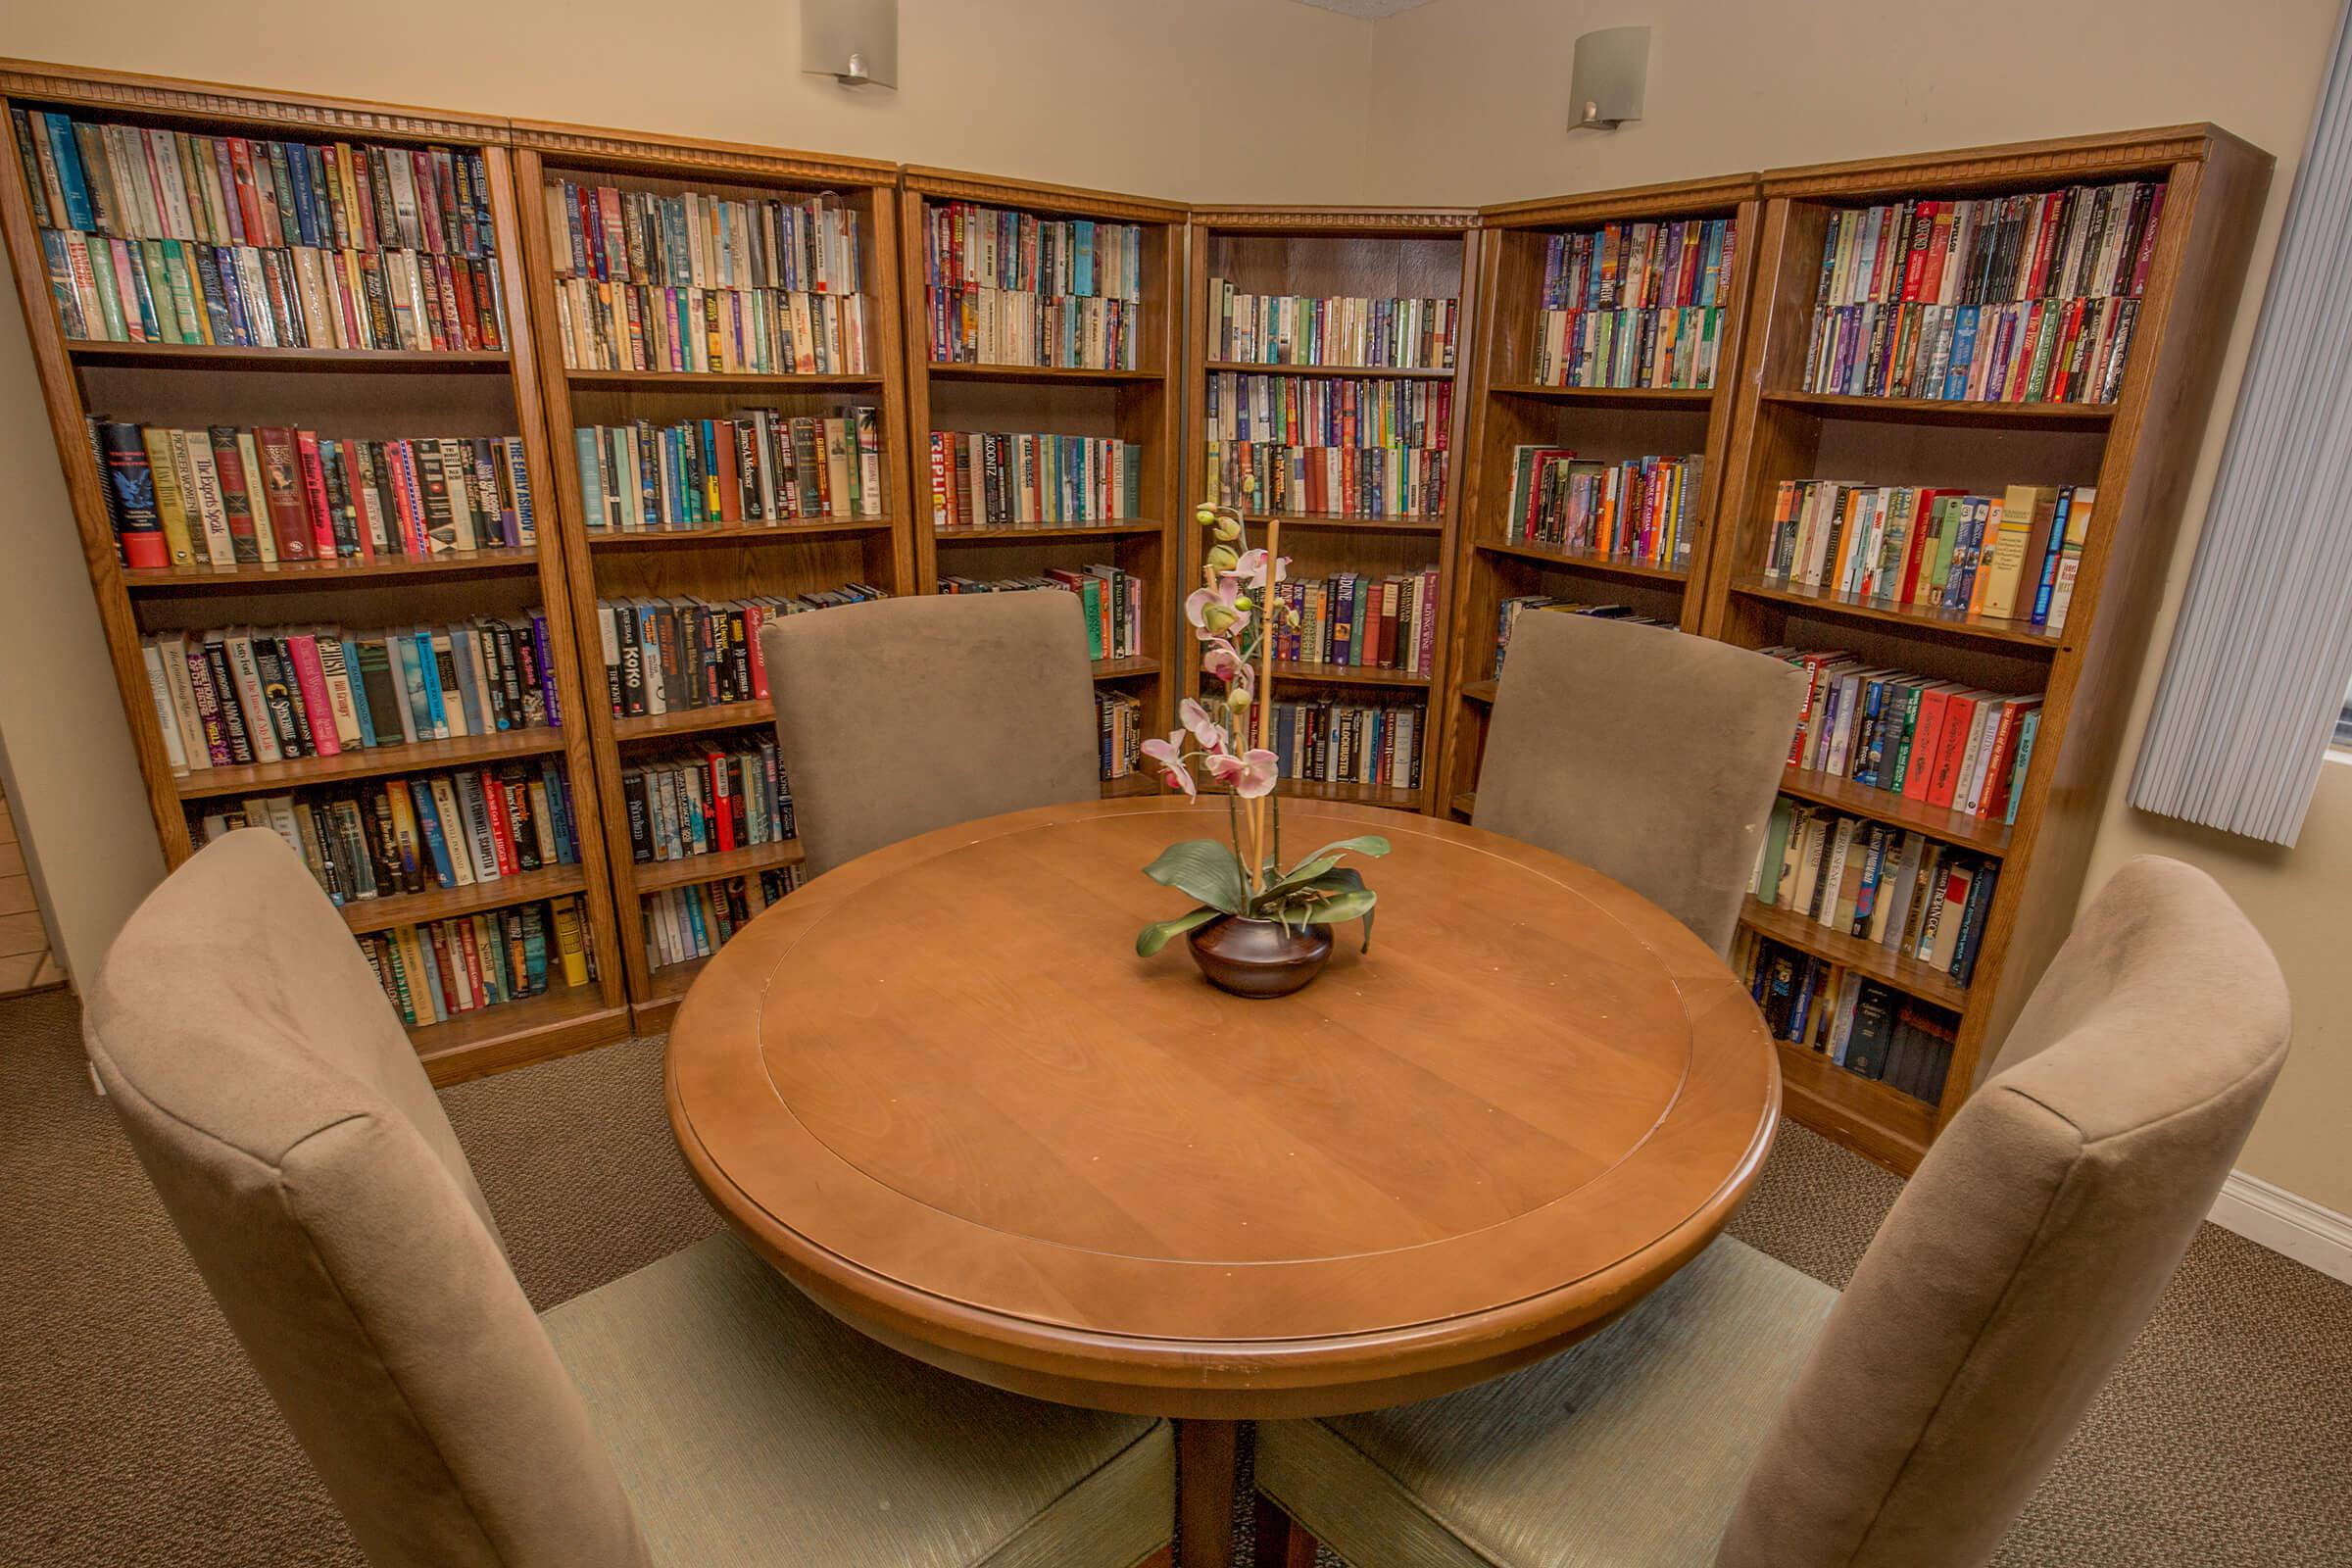 New Horizon Village Senior Apartment Homes library filled with books